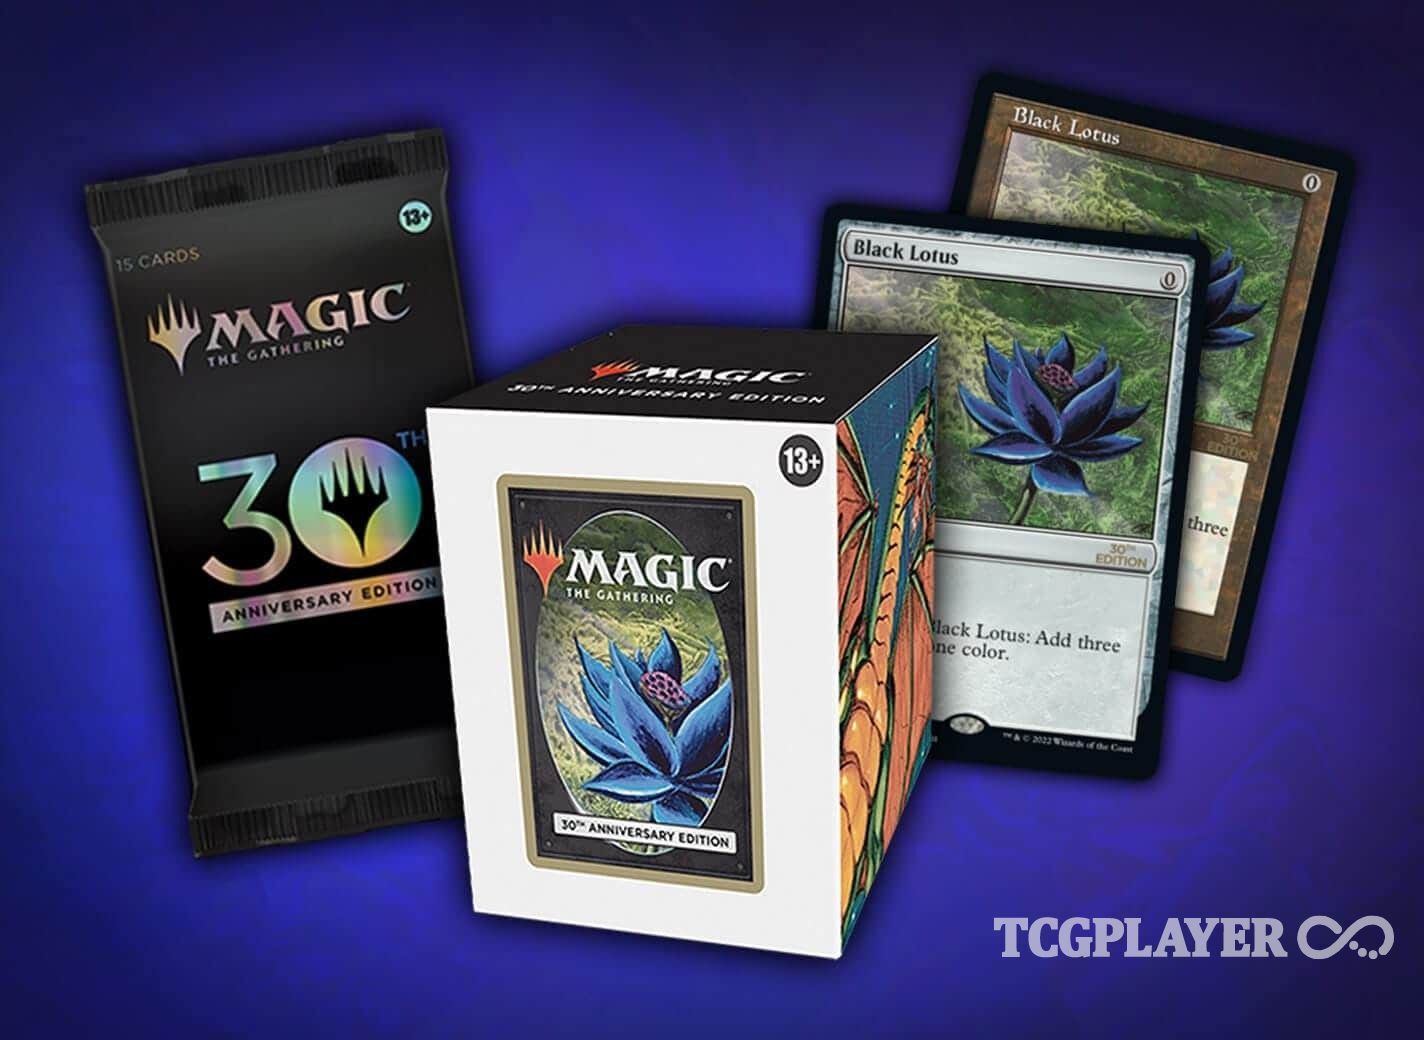 What are the Odds of a Black Lotus in Magic 30th Anniversary